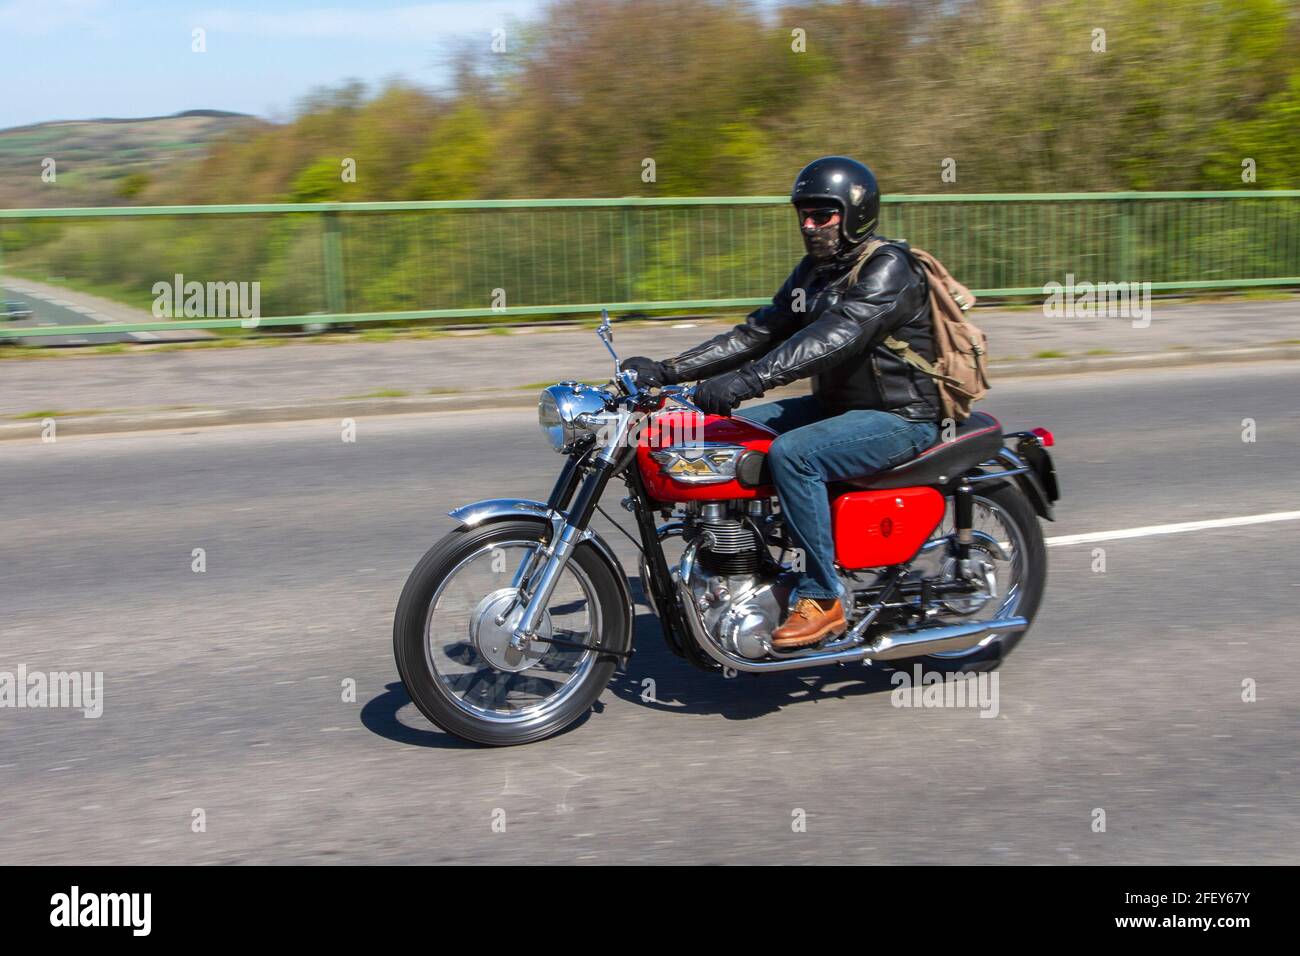 1962 60s Matchless 650cc motorcycle; Motorbike rider; two wheeled transport, motorcycles, vehicle on British roads, motorbikes, motorcycle bike riders motoring in Manchester, UK Stock Photo